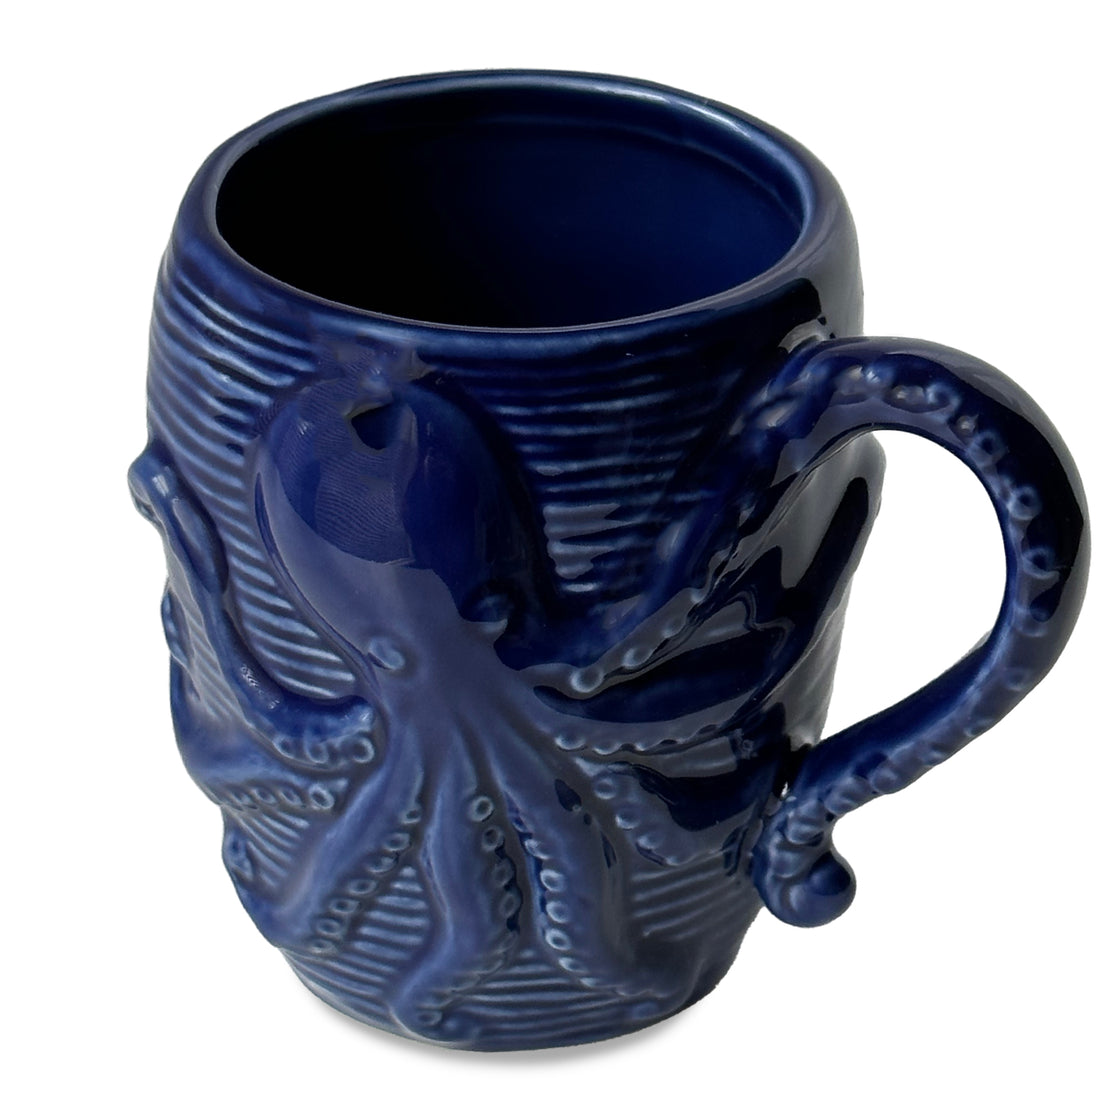 Ceramic mug in a deep navy blue color featuring an octopus design and an intricately crafted tentacle handle by rengöra